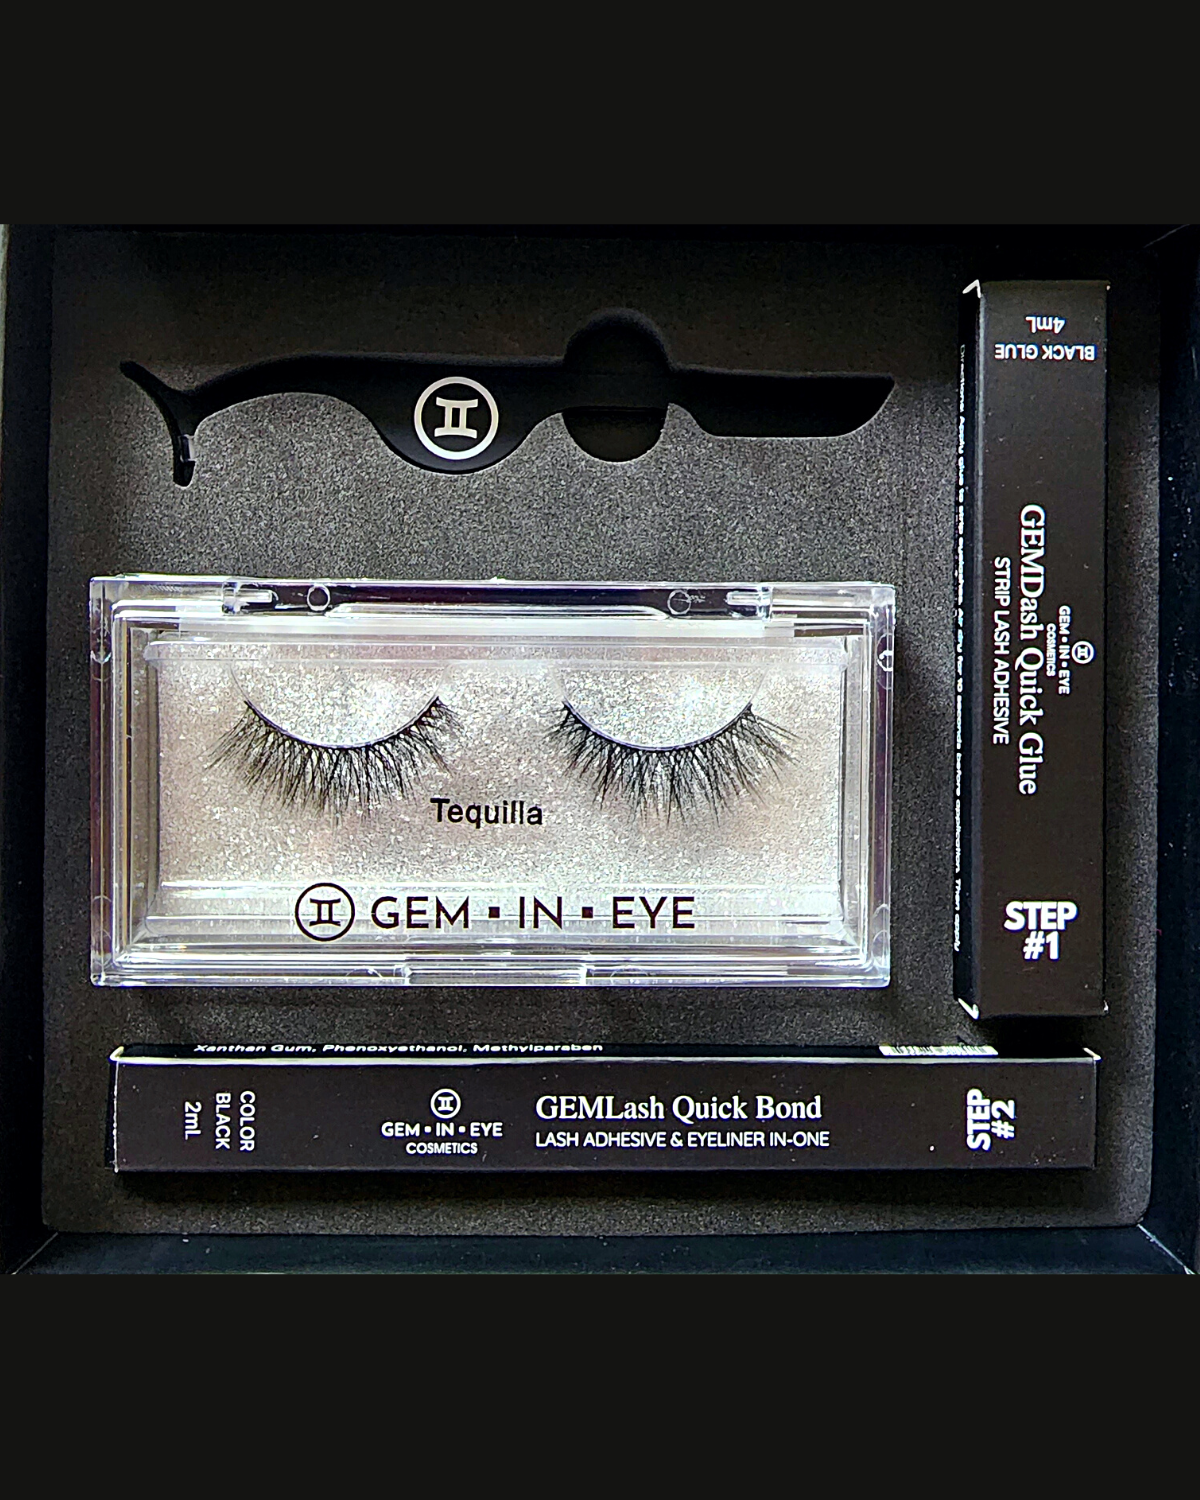 Lash&amp;Dash™ Kit is your &quot;LIFT-PROOF&quot; Lash Kit because of its &quot;glue-on-glue&quot; technique. Hassle-free &amp; worry-free application with ZERO-to-minimum drying time. The kit is complete with everything you need. It comes with a pair of eyelashes, eyelash glue, adhesive eyeliner pen and a u-shaped eyelash applicator.